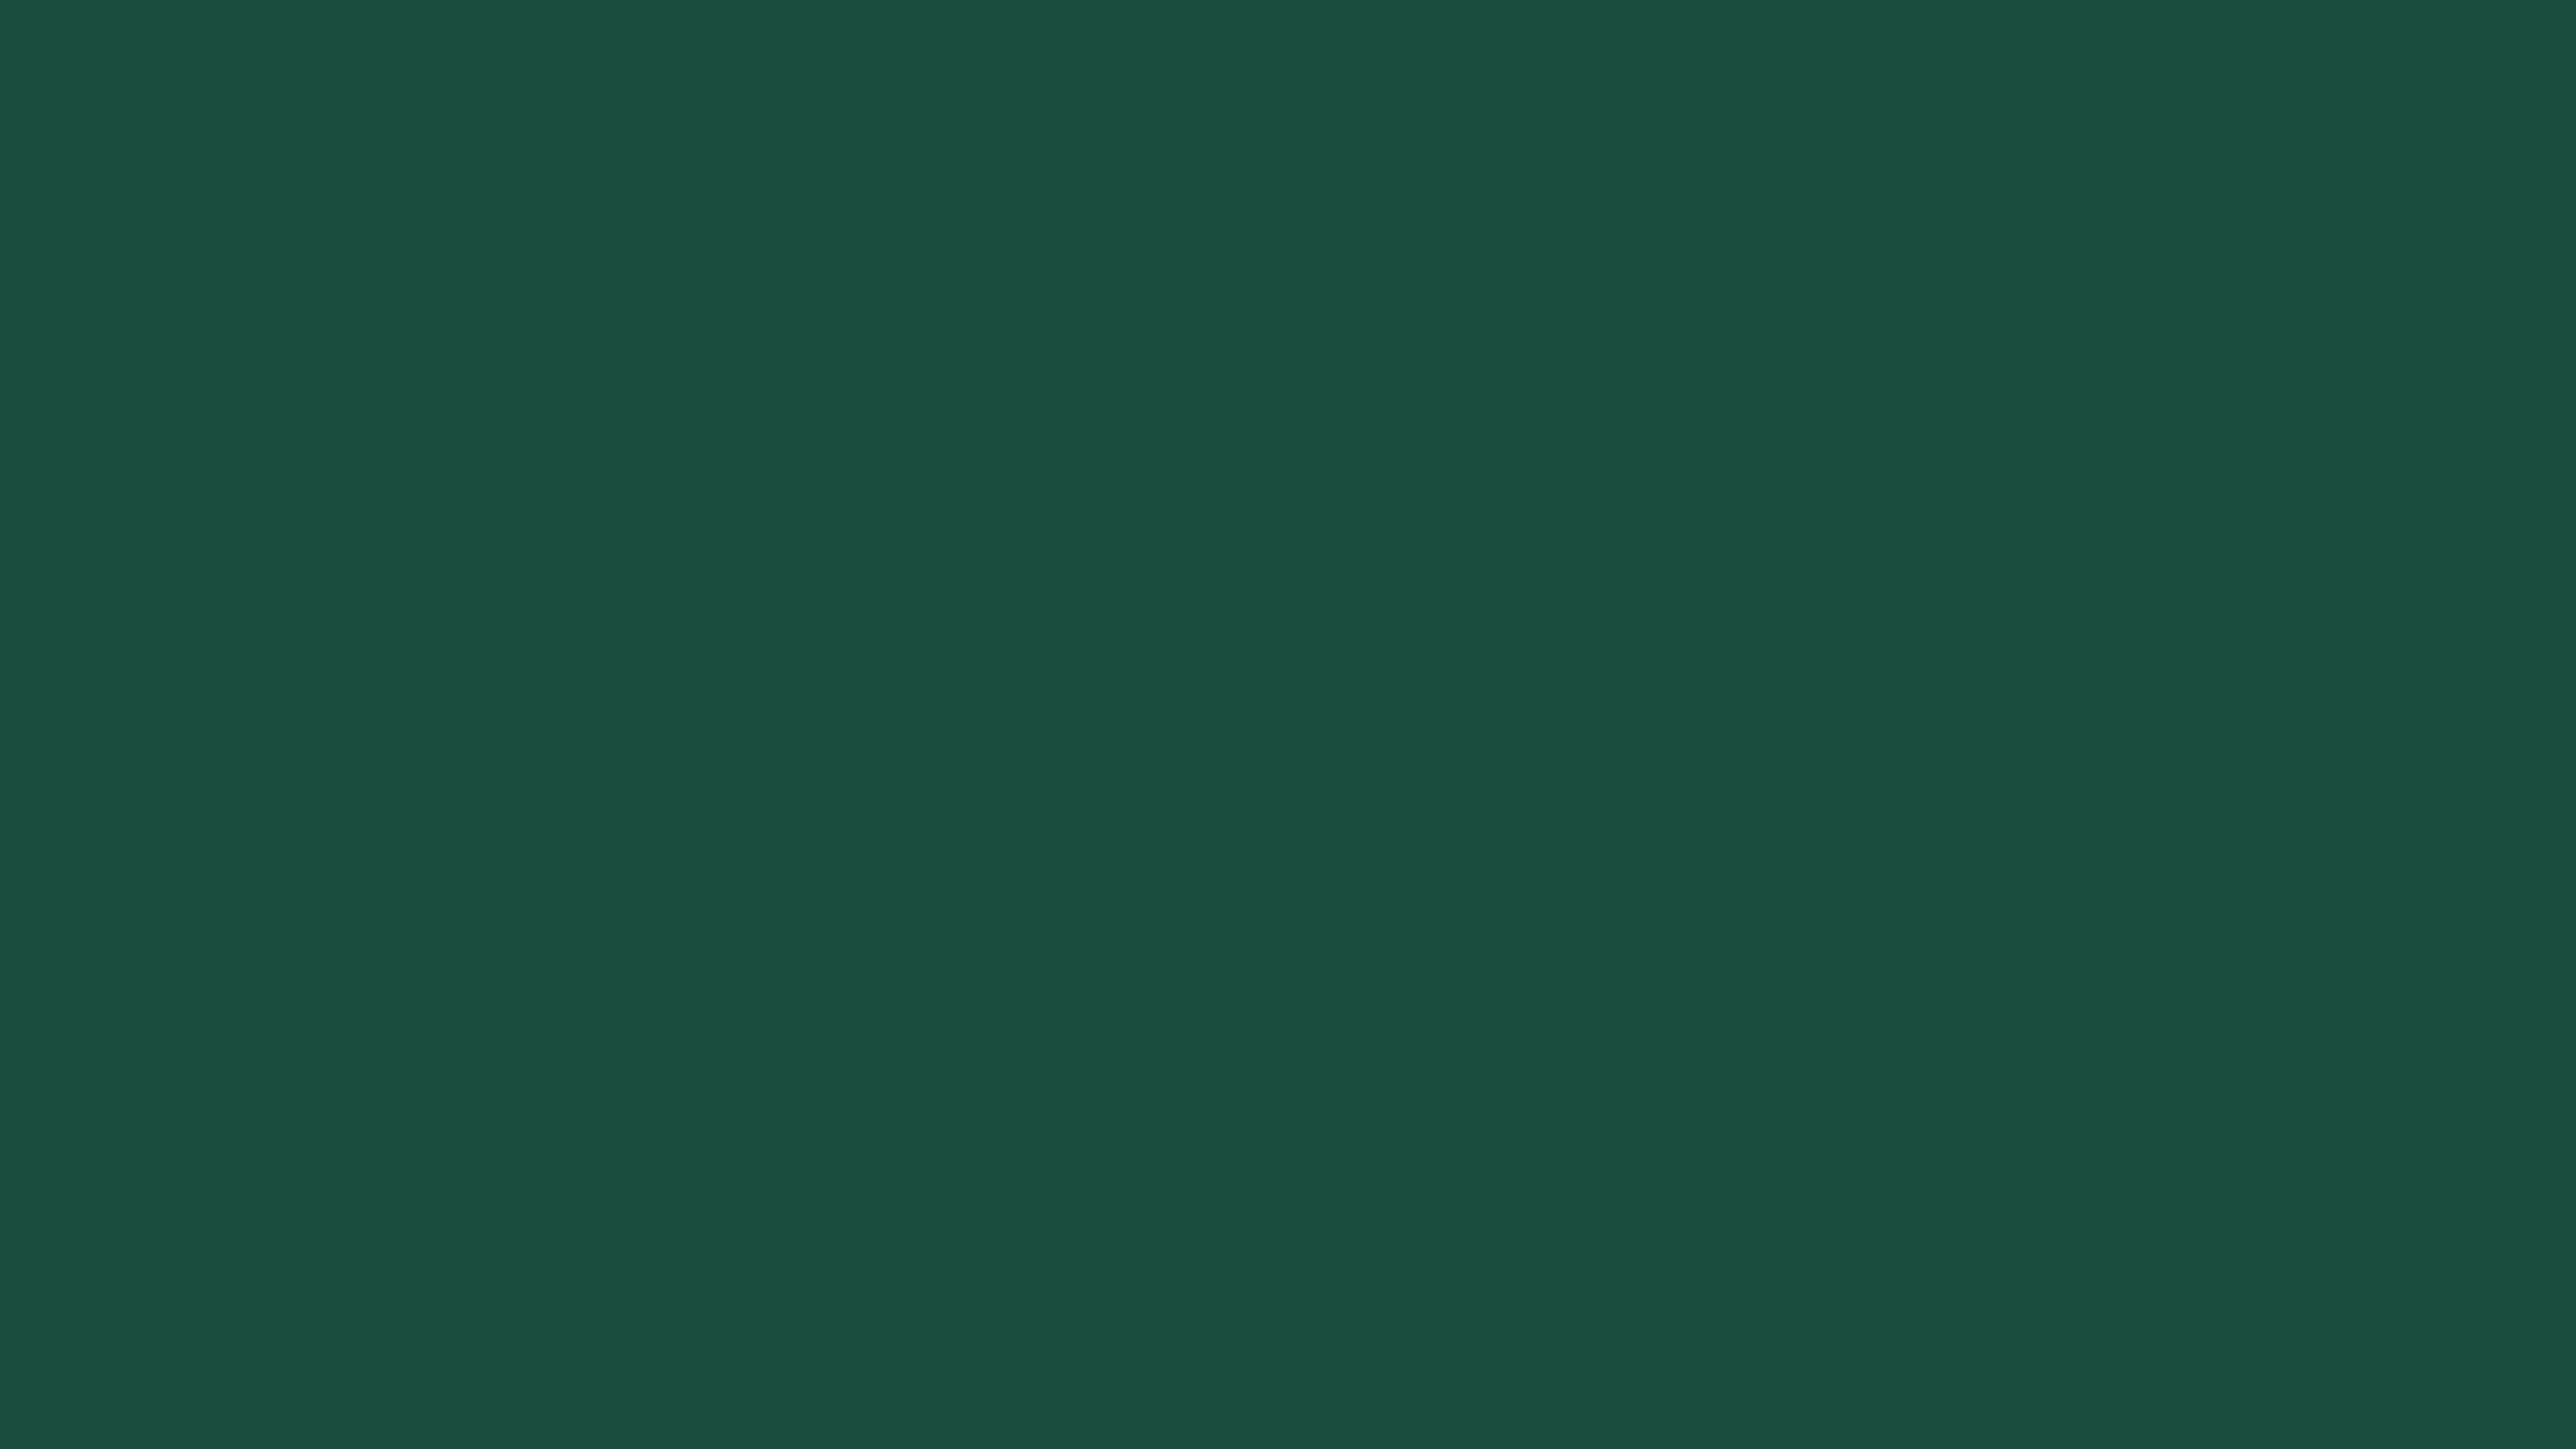 7680x4320 Brunswick Green Solid Color Background